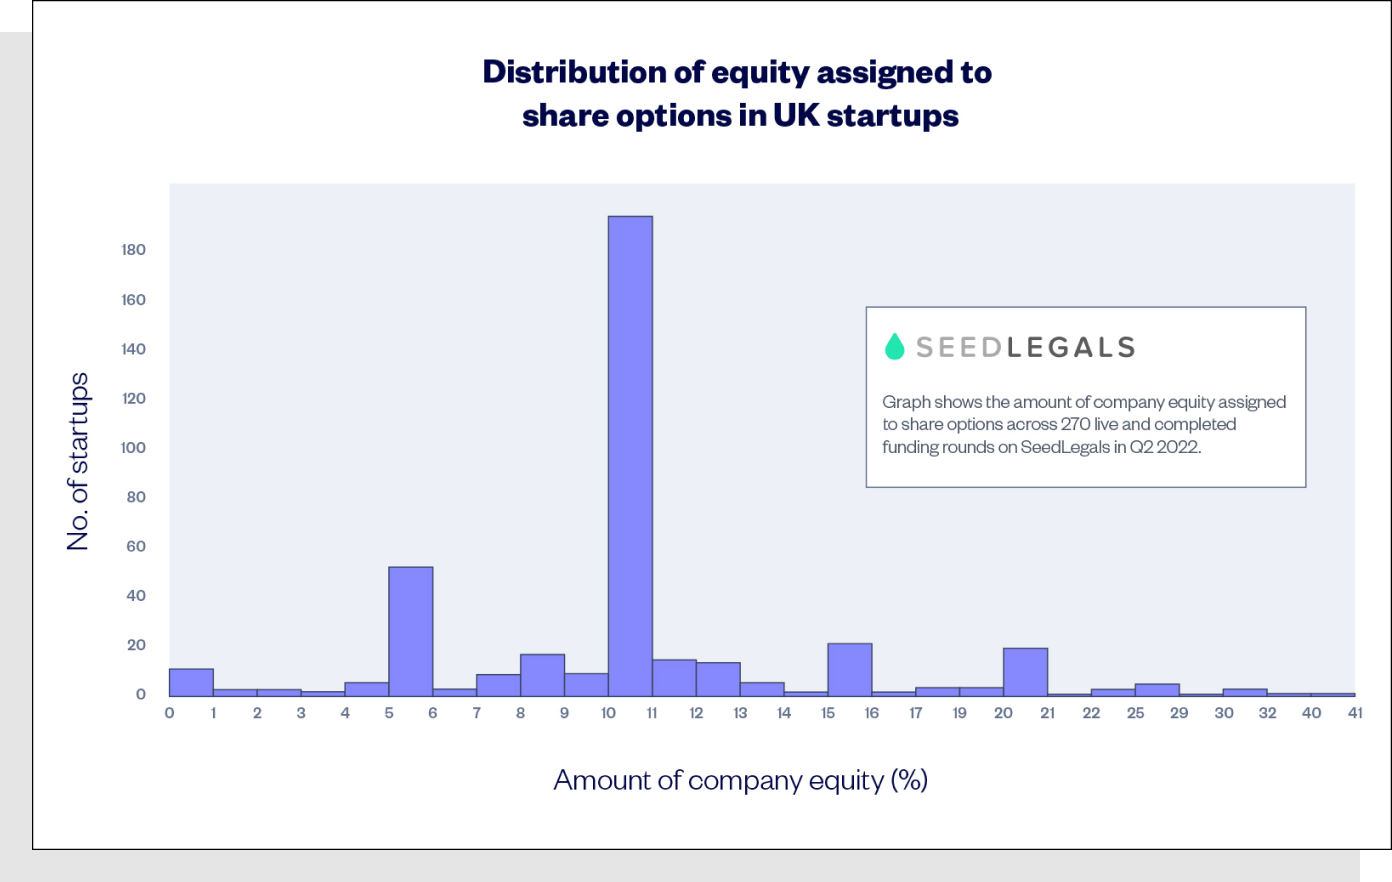 Distribution of equity assigned to share options in UK startups, Seedlegals graph.